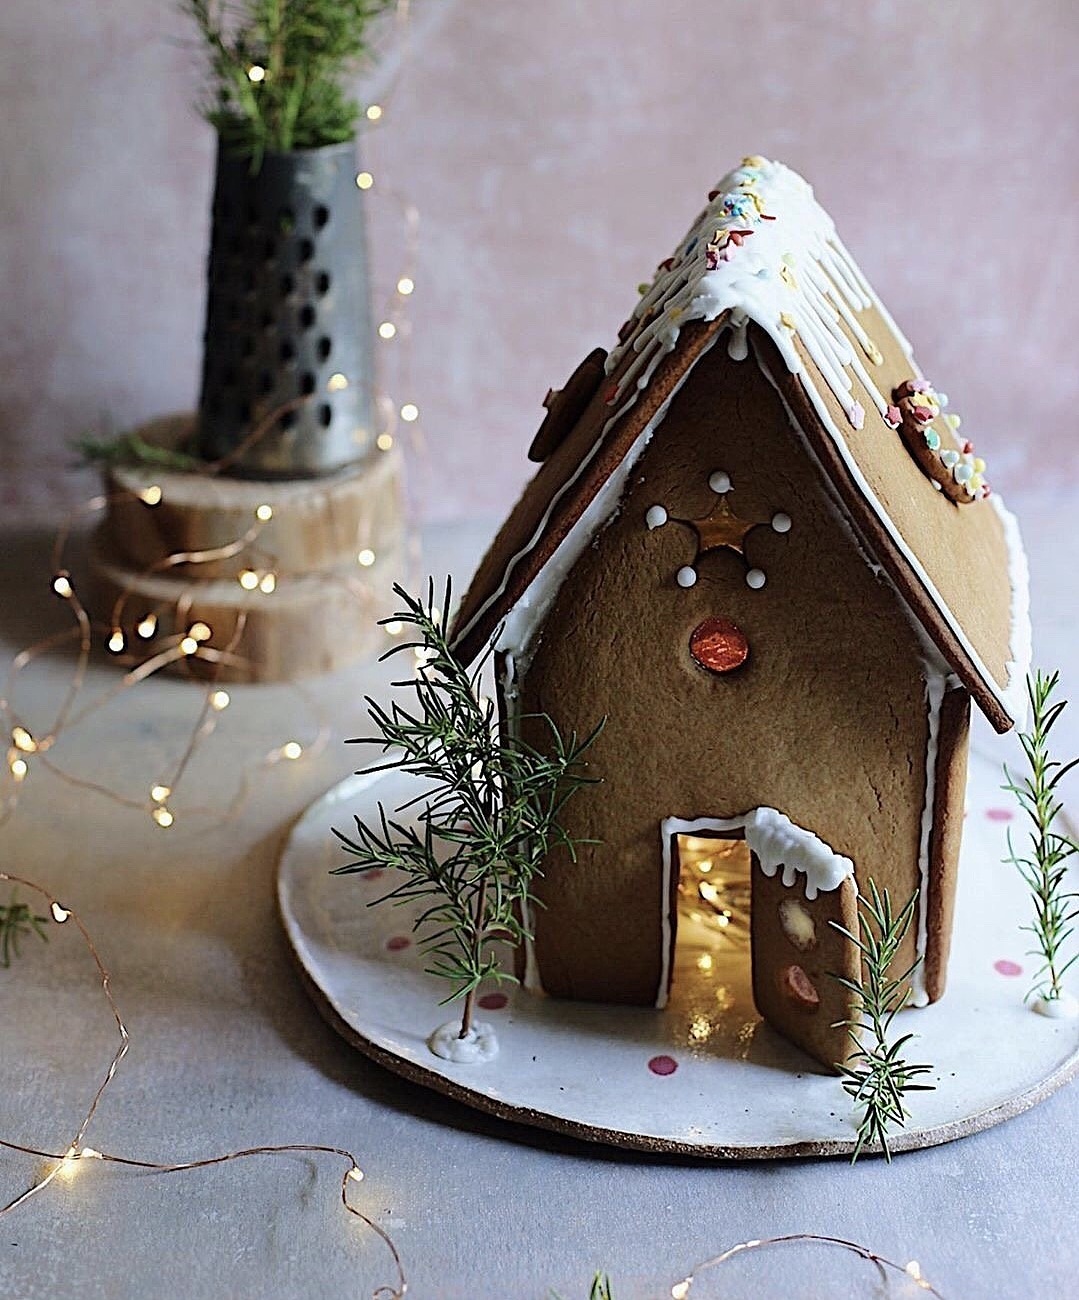 The World’s Best Gingerbread Houses - TravelVersed